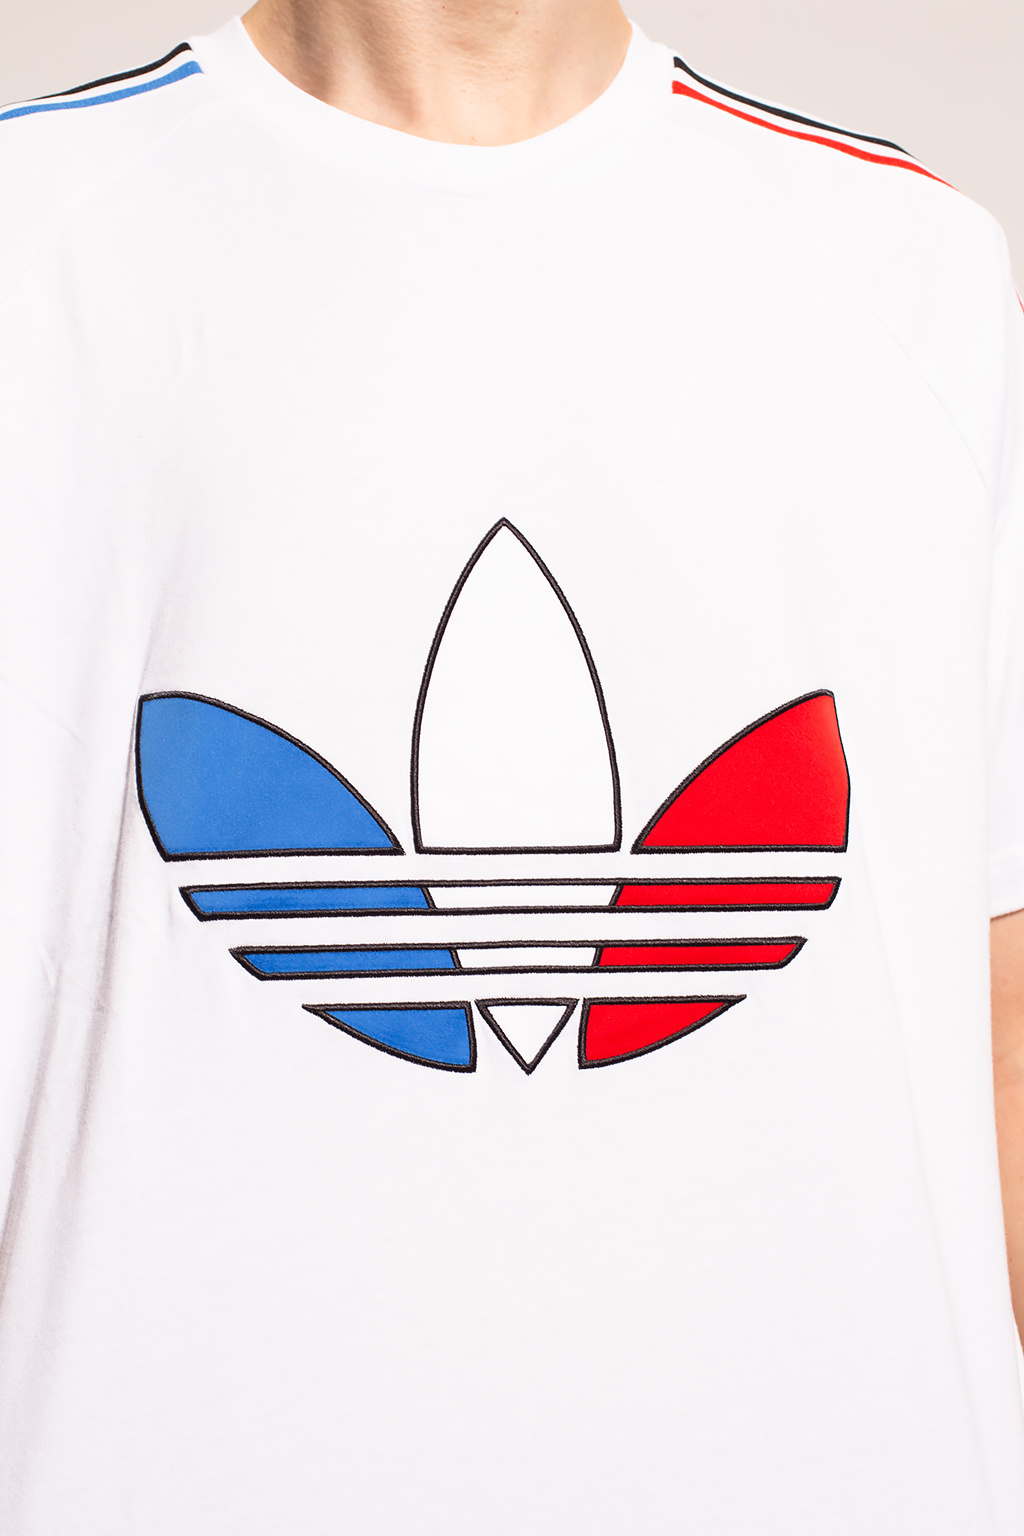 Louis Vuitton Floating LV Printed T Shirt - Luxe Finds UK